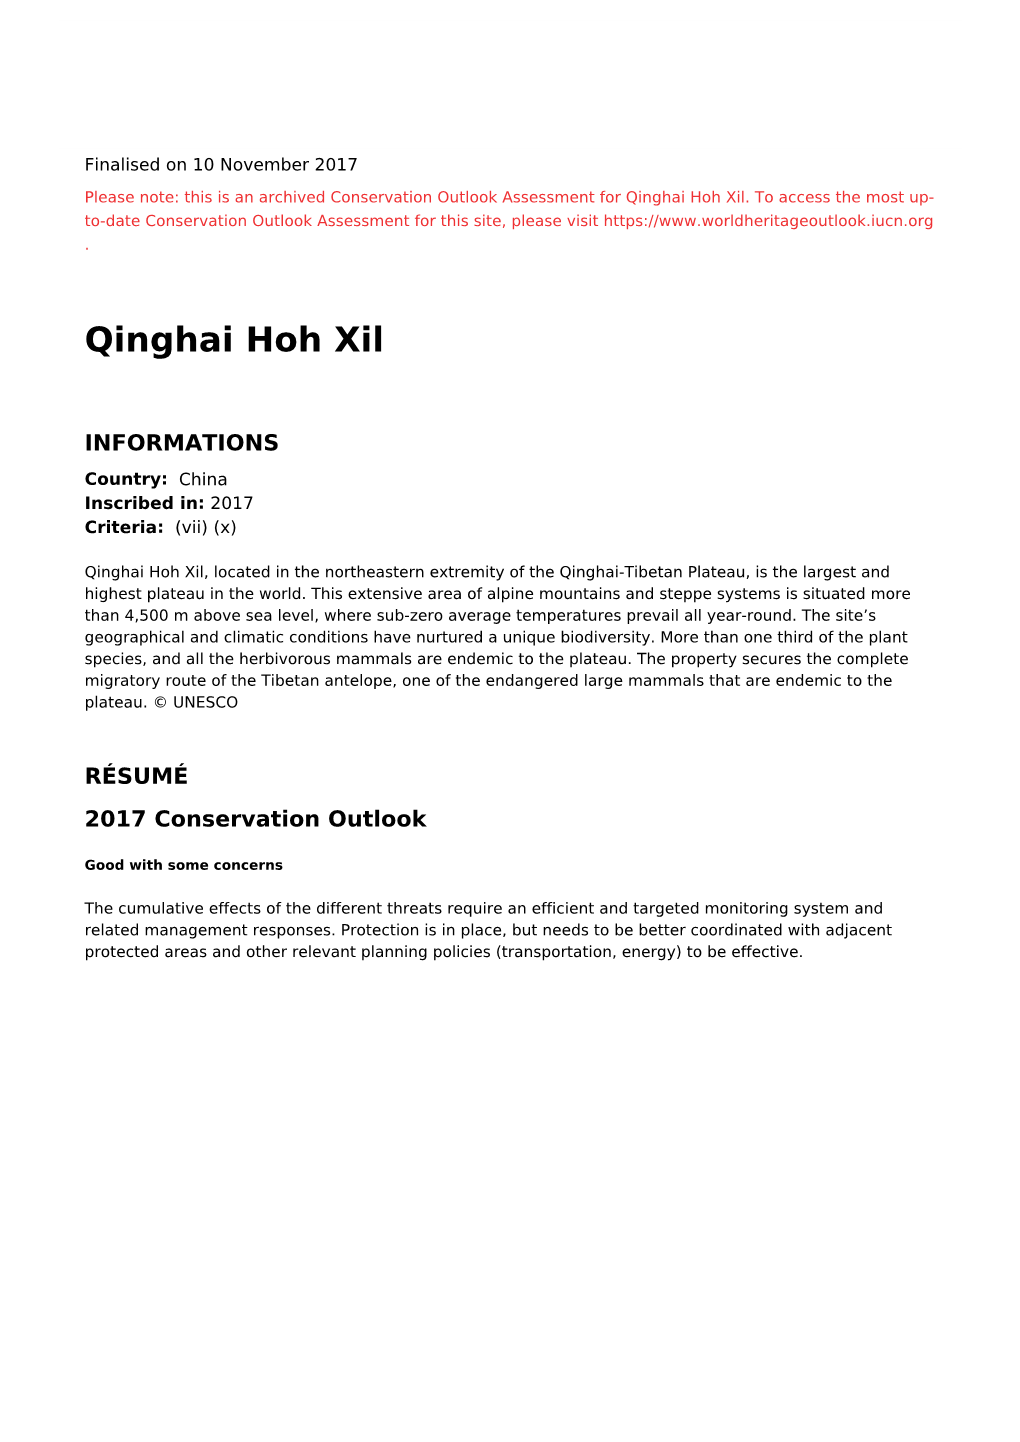 Qinghai Hoh Xil - 2017 Conservation Outlook Assessment (Archived)